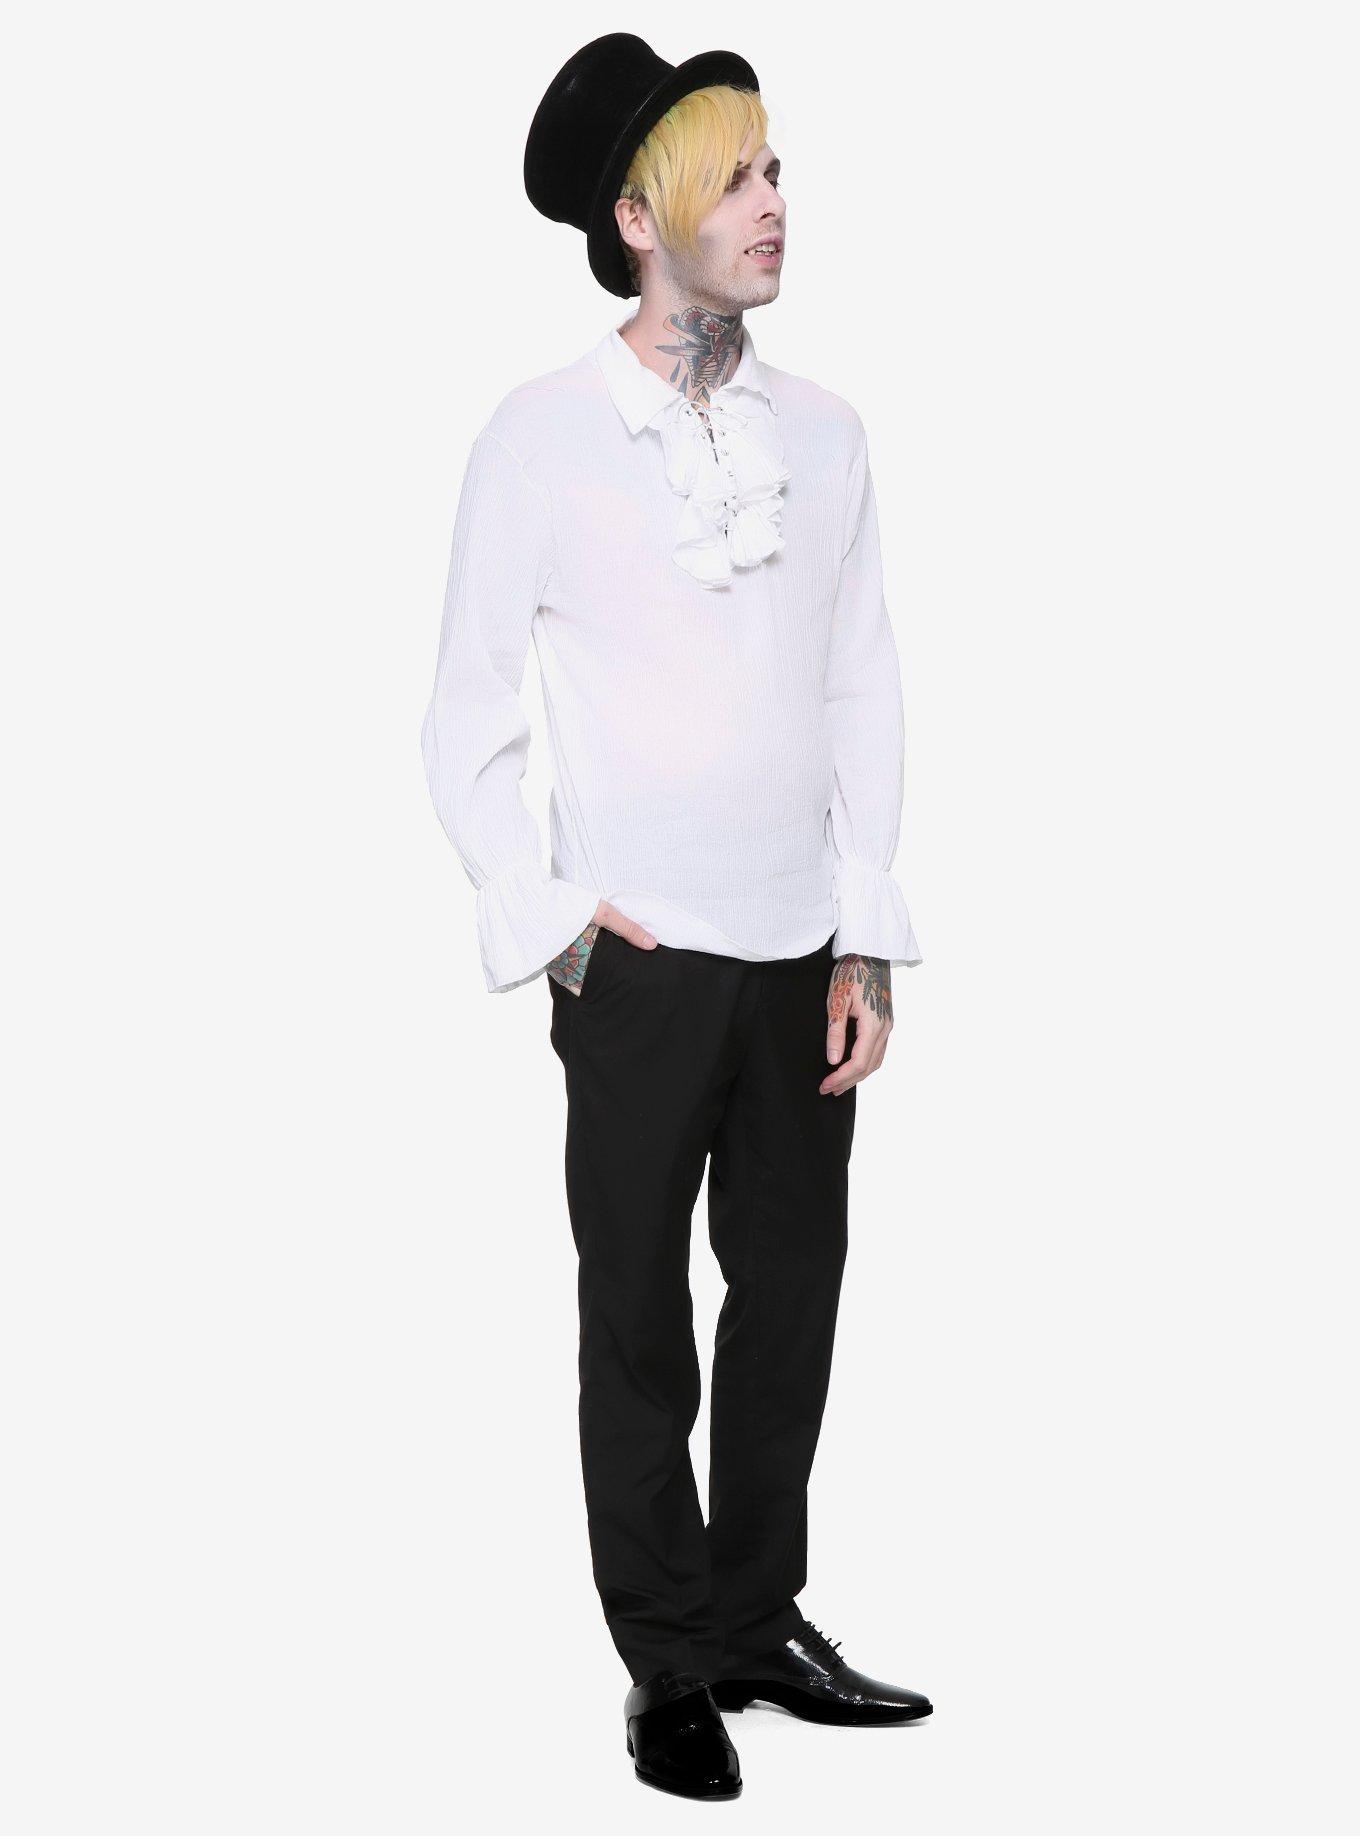 Rubie's White Ruffle Pirate Shirt - Men | Best Price and Reviews | Zulily